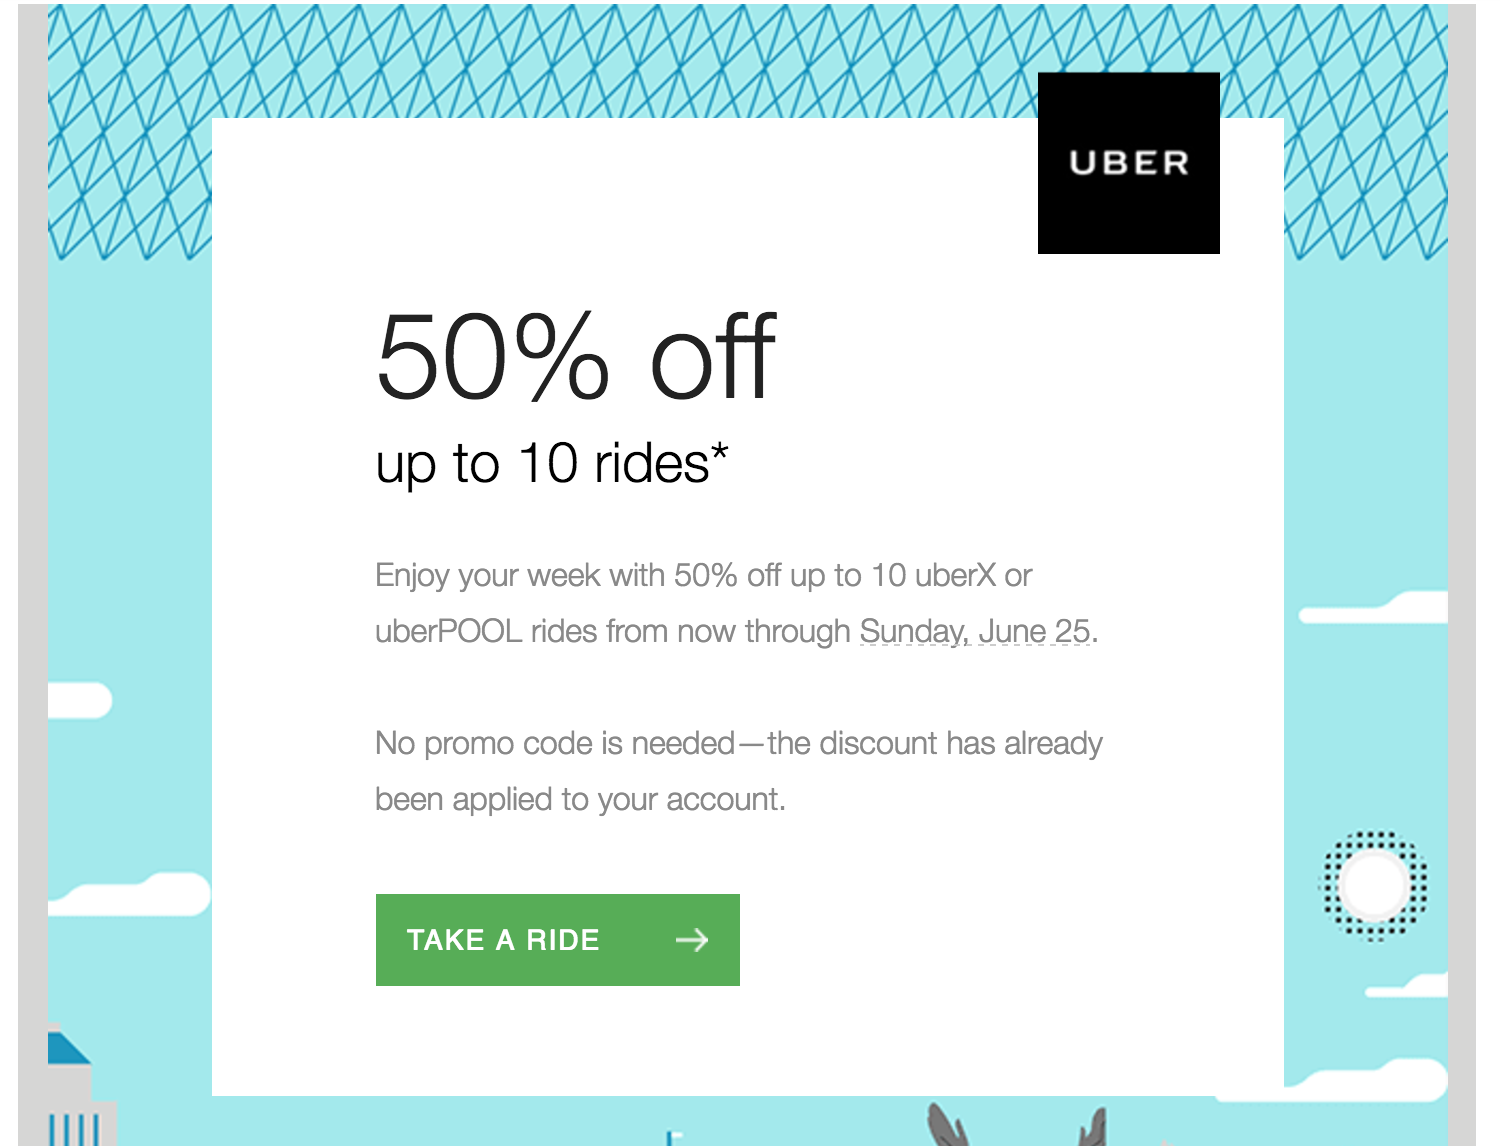 uber-promotion-50-off-up-to-10-rides-through-june-25-update-2017-06